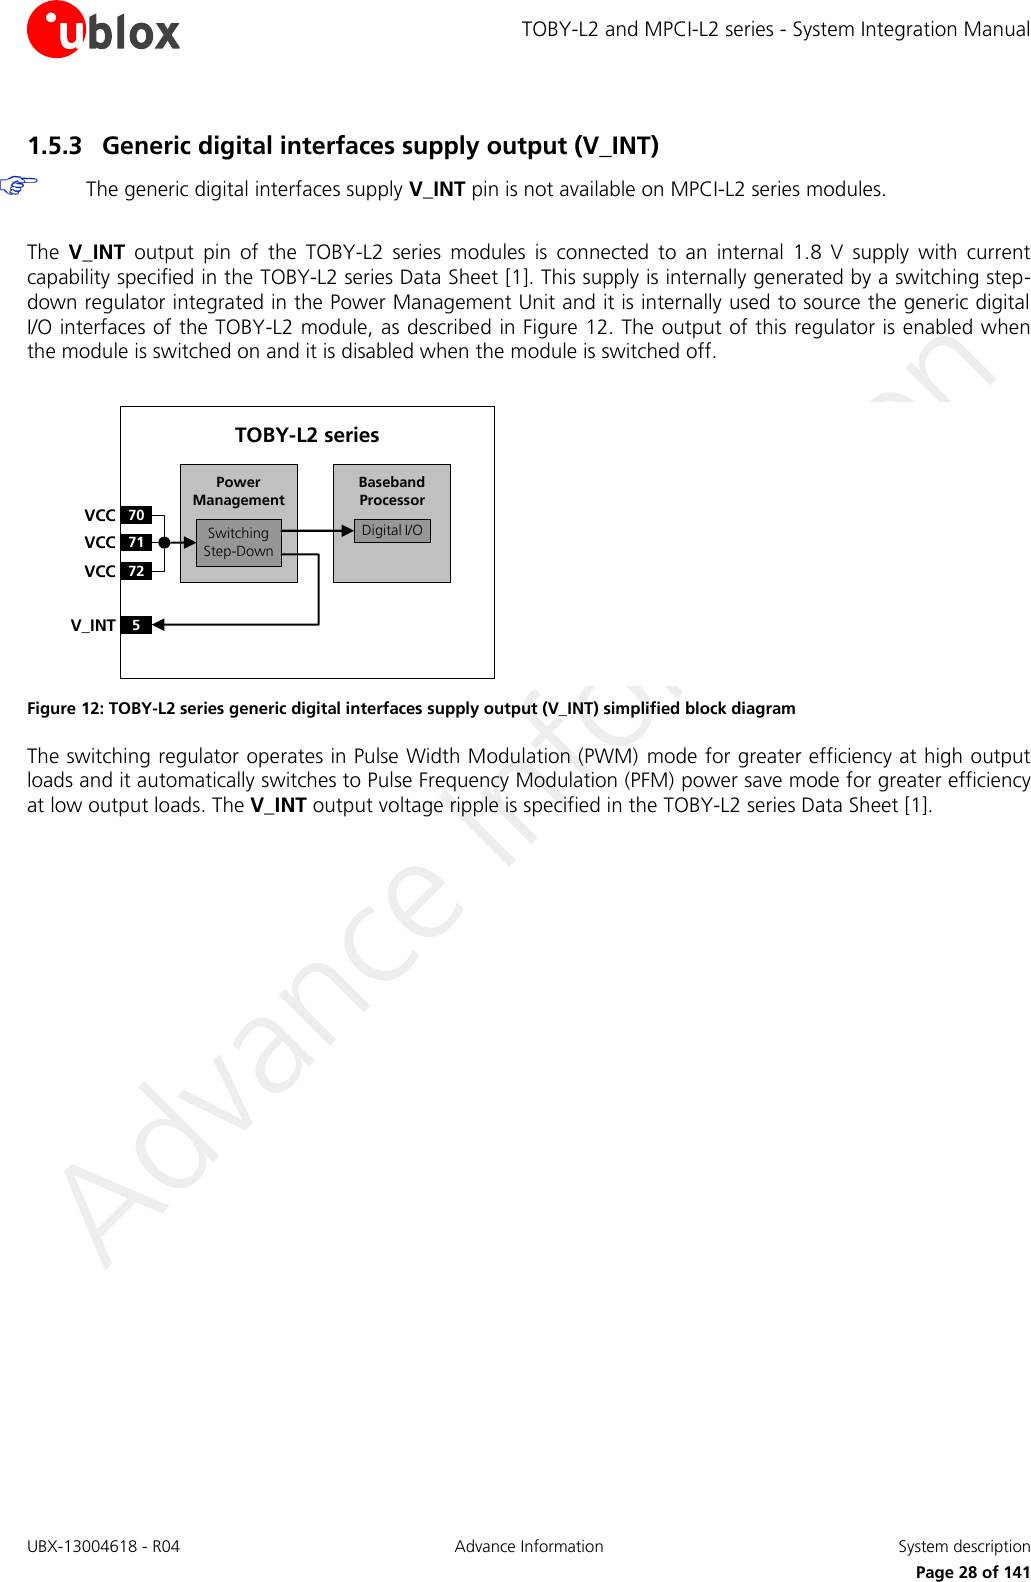 TOBY-L2 and MPCI-L2 series - System Integration Manual UBX-13004618 - R04  Advance Information  System description     Page 28 of 141 1.5.3 Generic digital interfaces supply output (V_INT)   The generic digital interfaces supply V_INT pin is not available on MPCI-L2 series modules.  The  V_INT  output  pin  of  the  TOBY-L2  series modules  is  connected  to  an  internal  1.8  V  supply  with  current capability specified in the TOBY-L2 series Data Sheet [1]. This supply is internally generated by a switching step-down regulator integrated in the Power Management Unit and it is internally used to source the generic digital I/O interfaces of the TOBY-L2 module, as described in Figure 12. The output of this regulator is enabled when the module is switched on and it is disabled when the module is switched off.  Baseband Processor70VCC71VCC72VCC5V_INTSwitchingStep-DownPower ManagementTOBY-L2 seriesDigital I/O Figure 12: TOBY-L2 series generic digital interfaces supply output (V_INT) simplified block diagram The switching regulator operates in Pulse Width Modulation (PWM)  mode for greater efficiency at high output loads and it automatically switches to Pulse Frequency Modulation (PFM) power save mode for greater efficiency at low output loads. The V_INT output voltage ripple is specified in the TOBY-L2 series Data Sheet [1].  